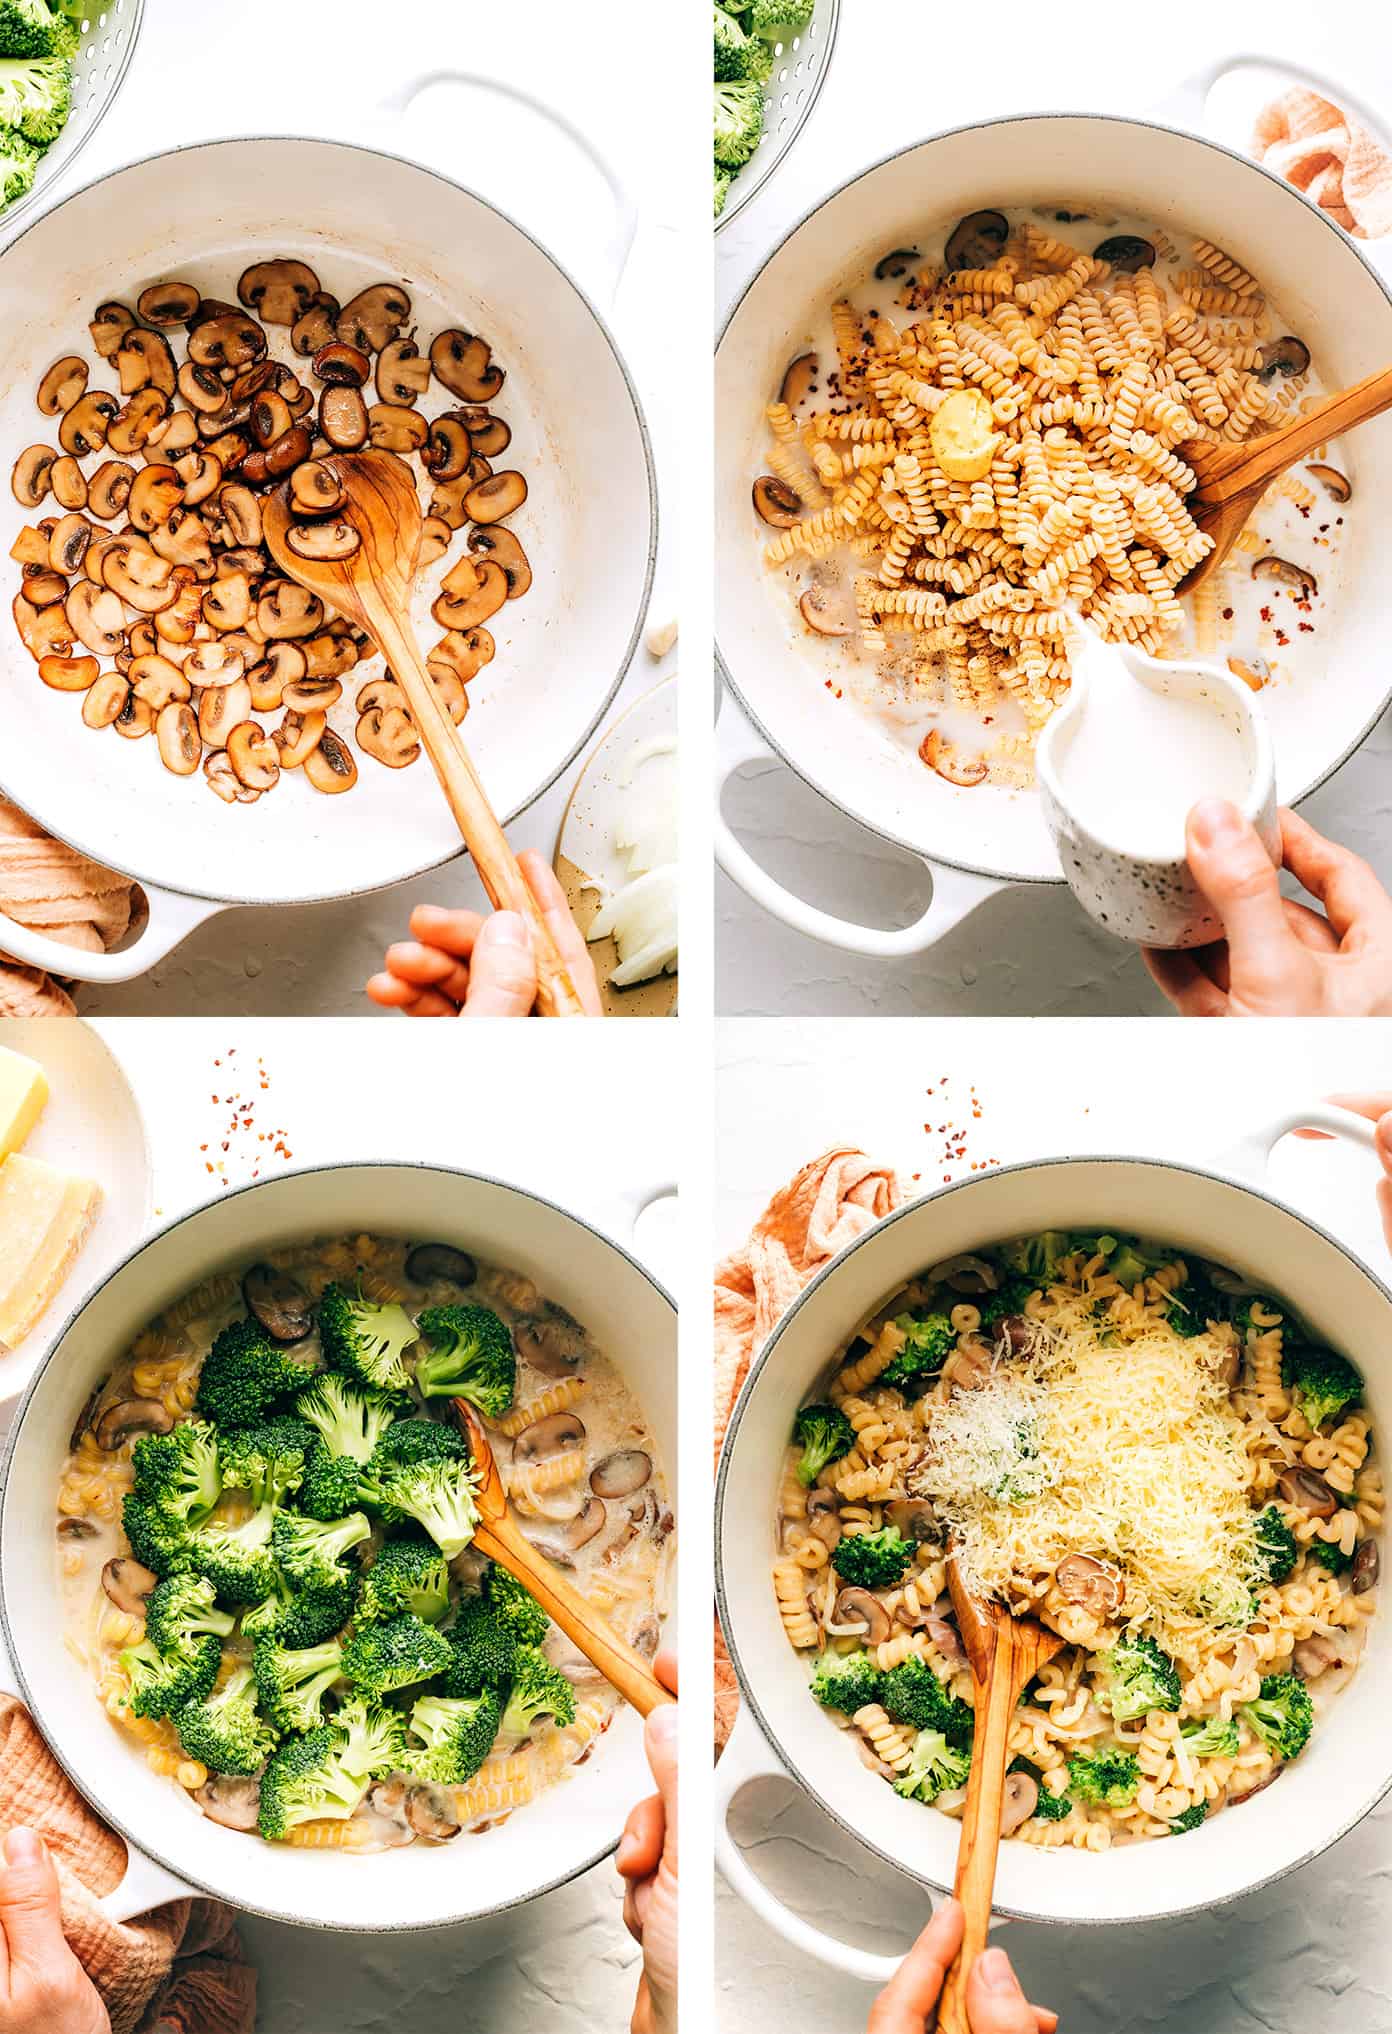 Step by step photos showing how to make broccoli mac and cheese